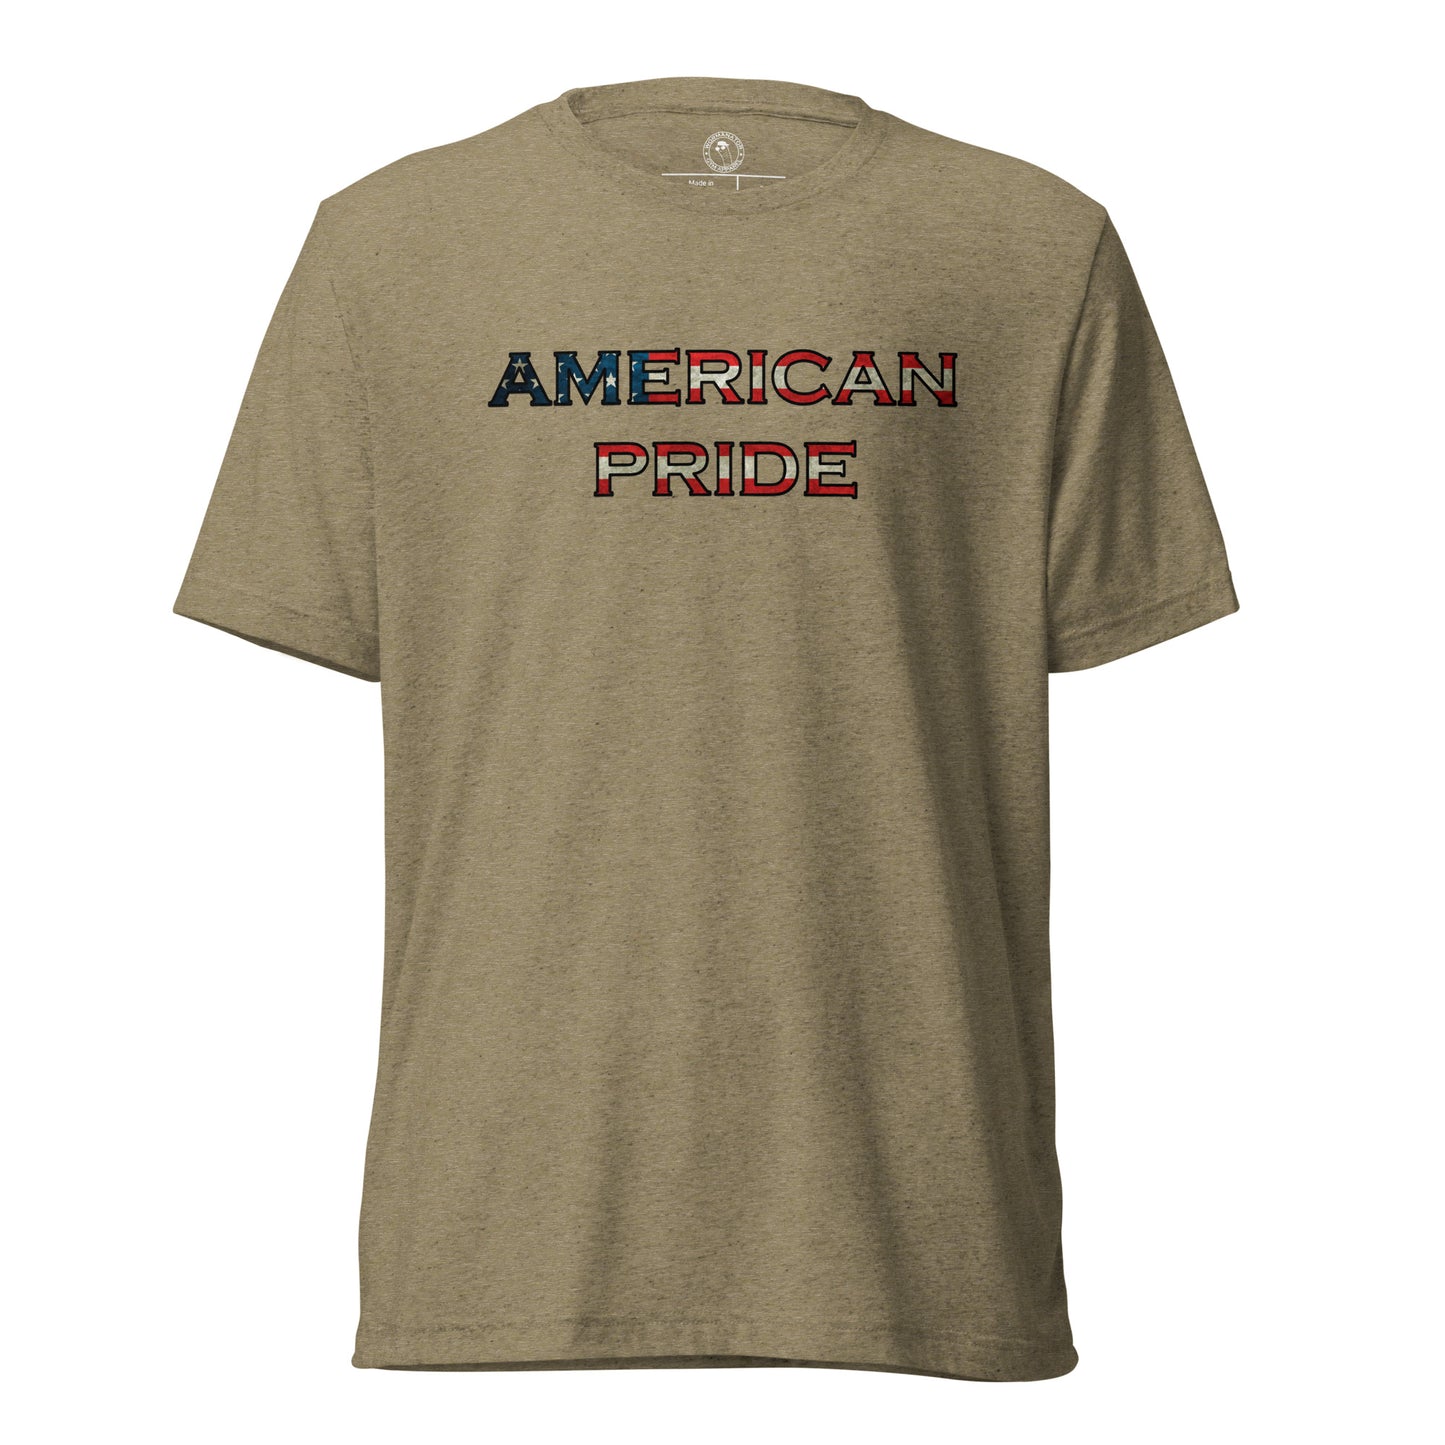 American Pride T-Shirt in Olive Triblend